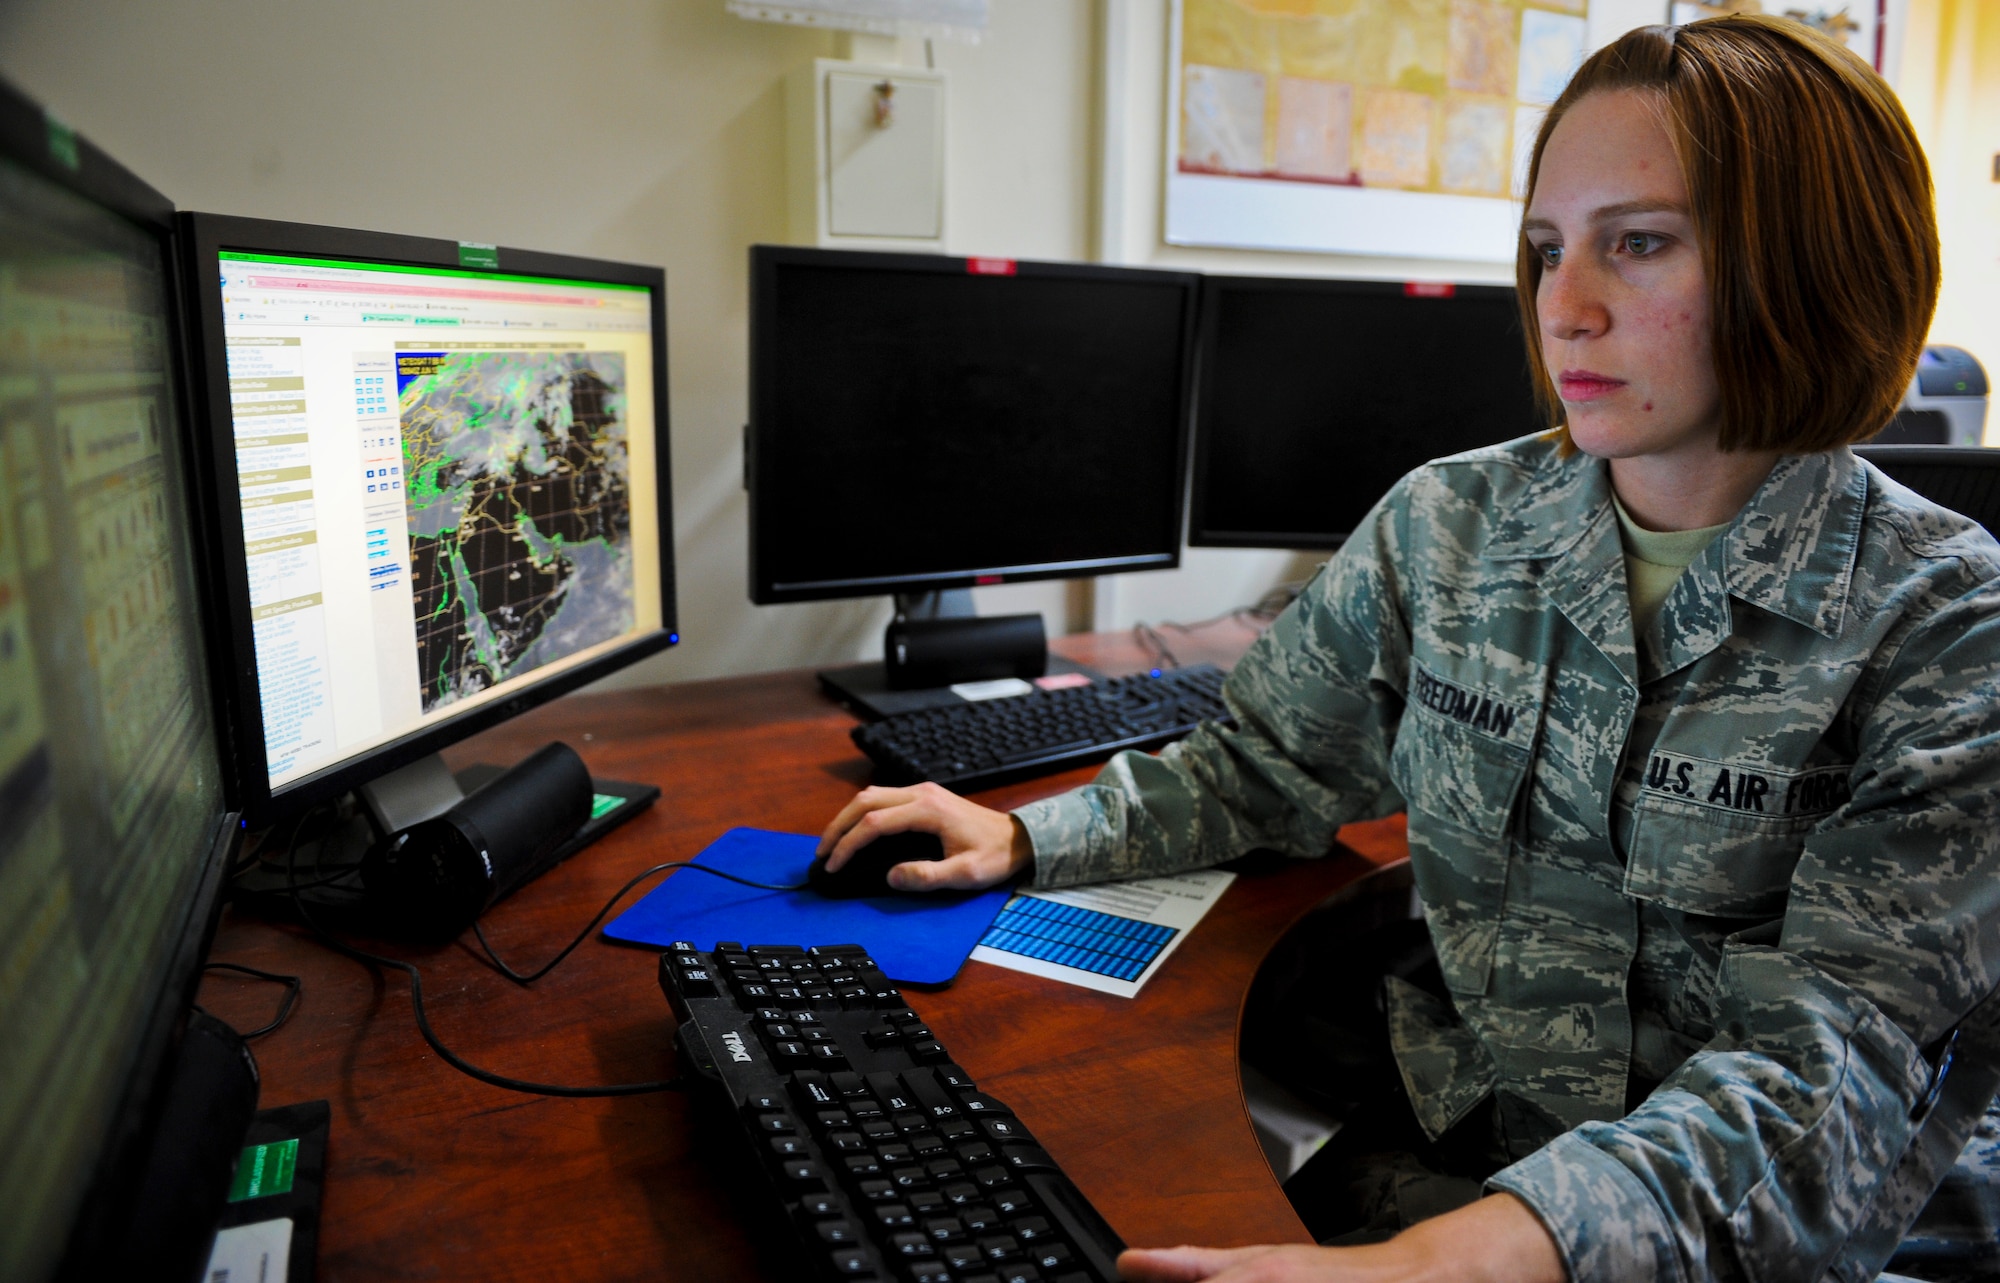 Senior Airman Alicia Freedman analyzes weather data as she prepares a forecast briefing for base leadership at the 379th Air Expeditionary Wing in Southwest Asia, June 19, 2013. Freedman is a 379th Expeditionary Operations Support Squadron weather forecaster deployed from Barksdale Air Force Base, La. (U.S. Air Force photo/Senior Airman Benjamin Stratton)